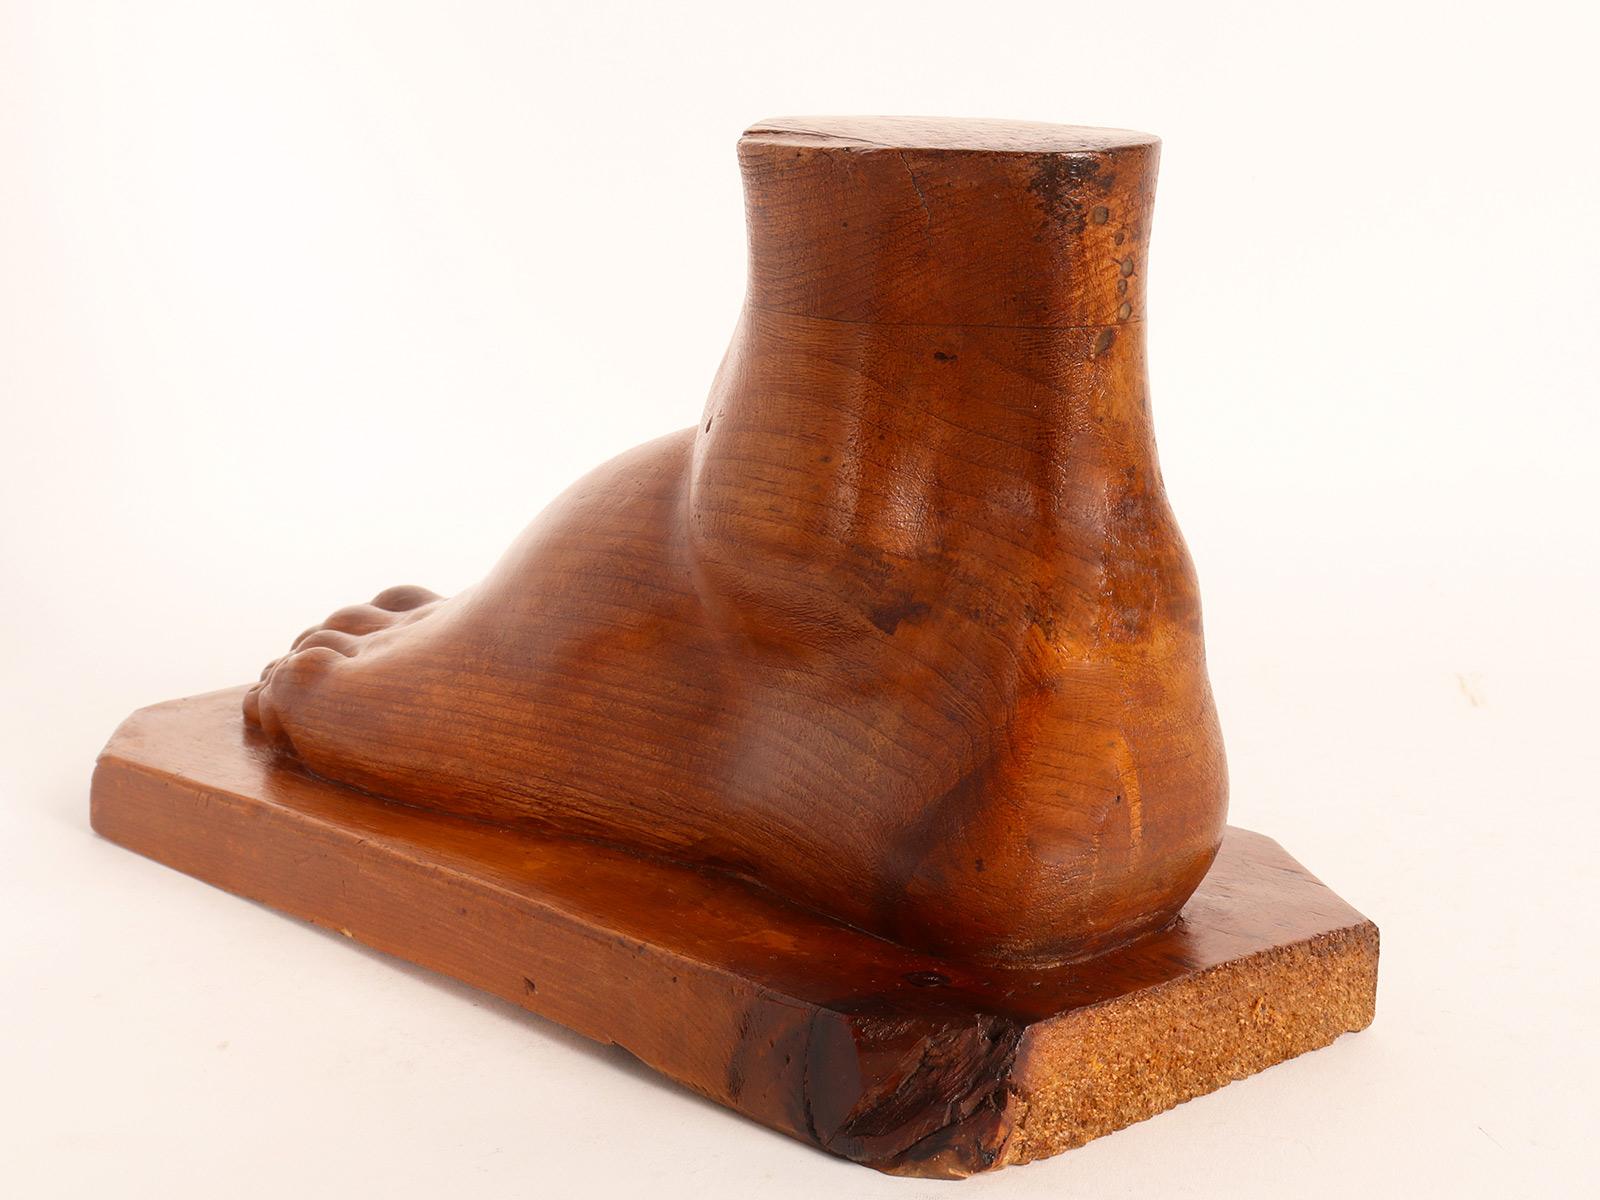 20th Century Artistic Atelier Sculpture Depicting a Foot, Germany, 1902  For Sale